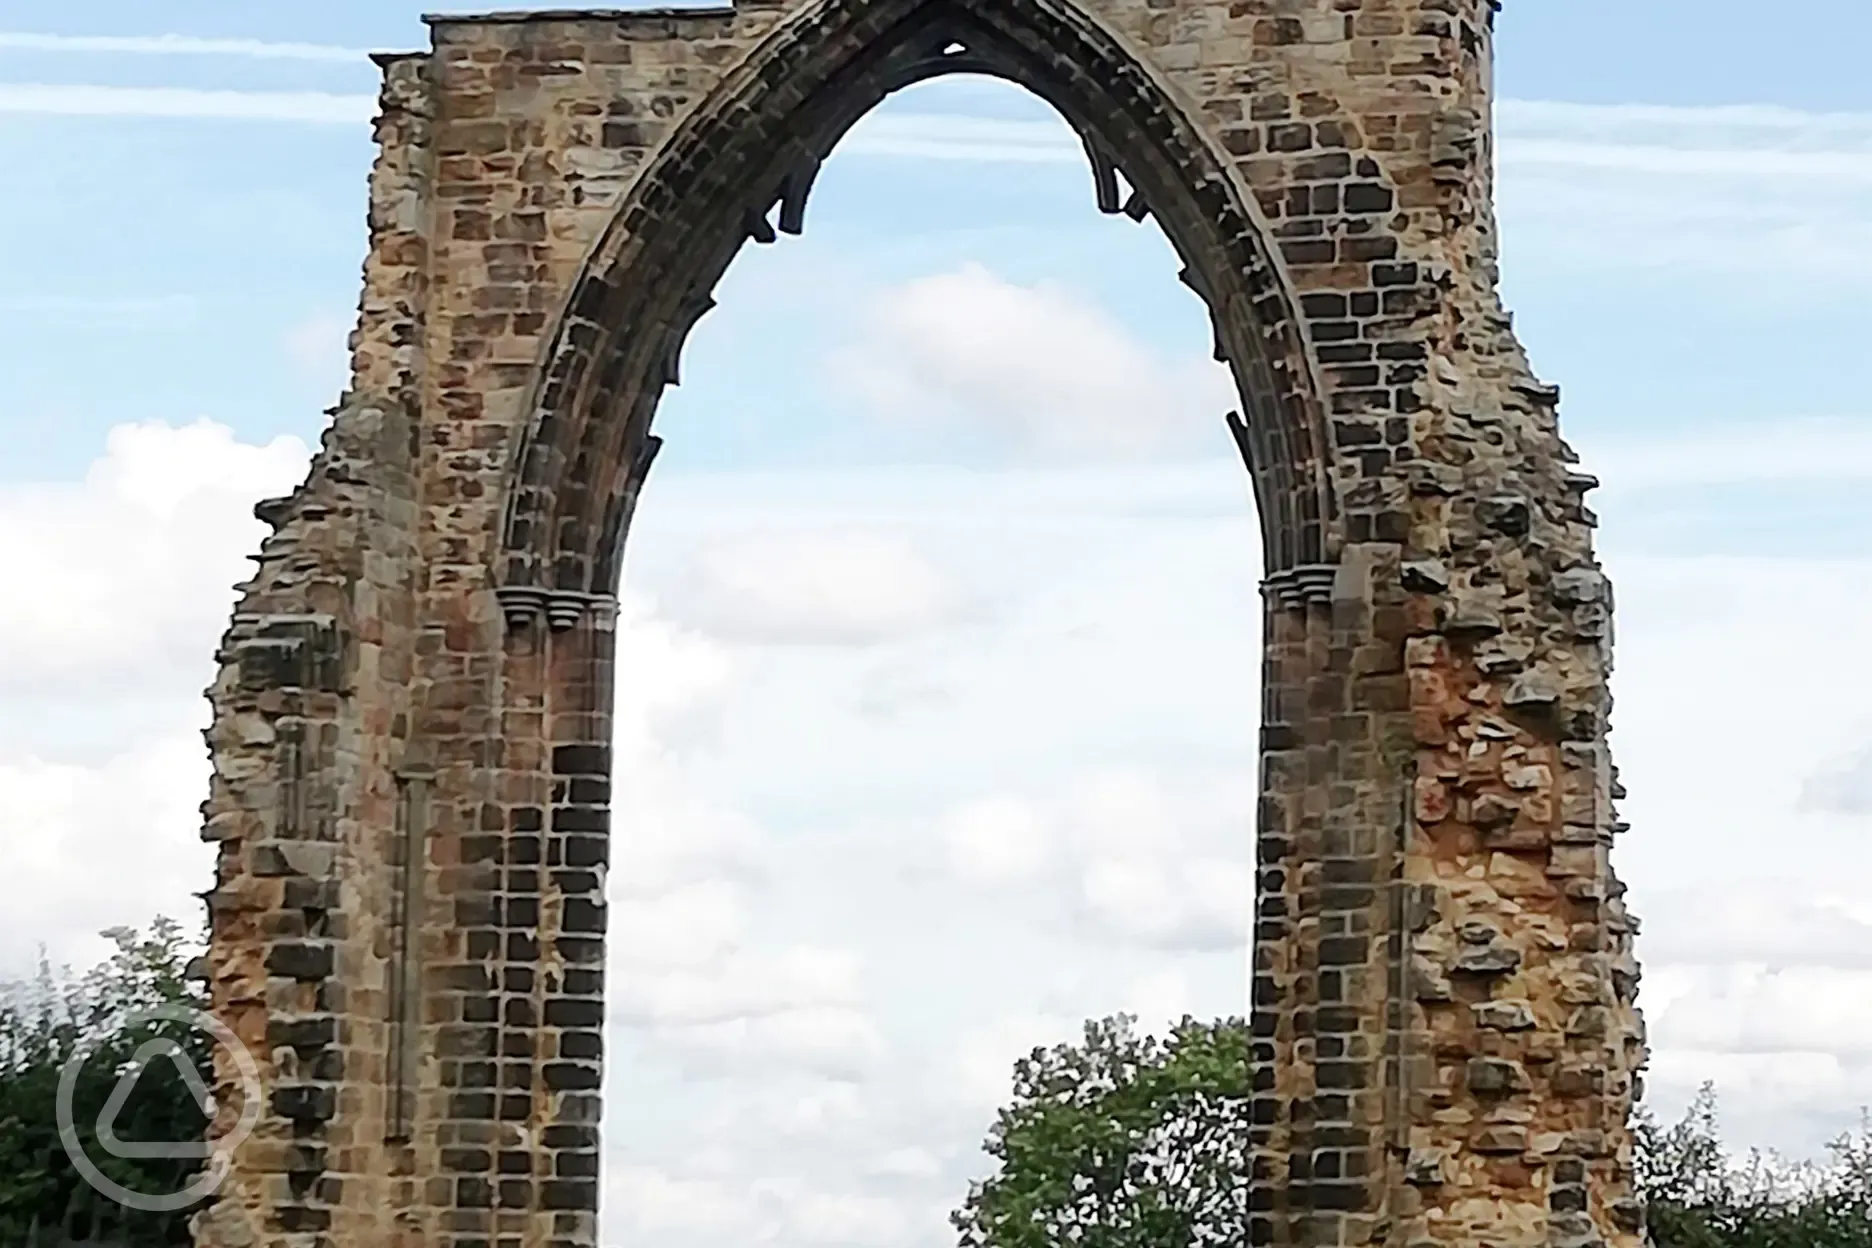 The Abbey Ruins.